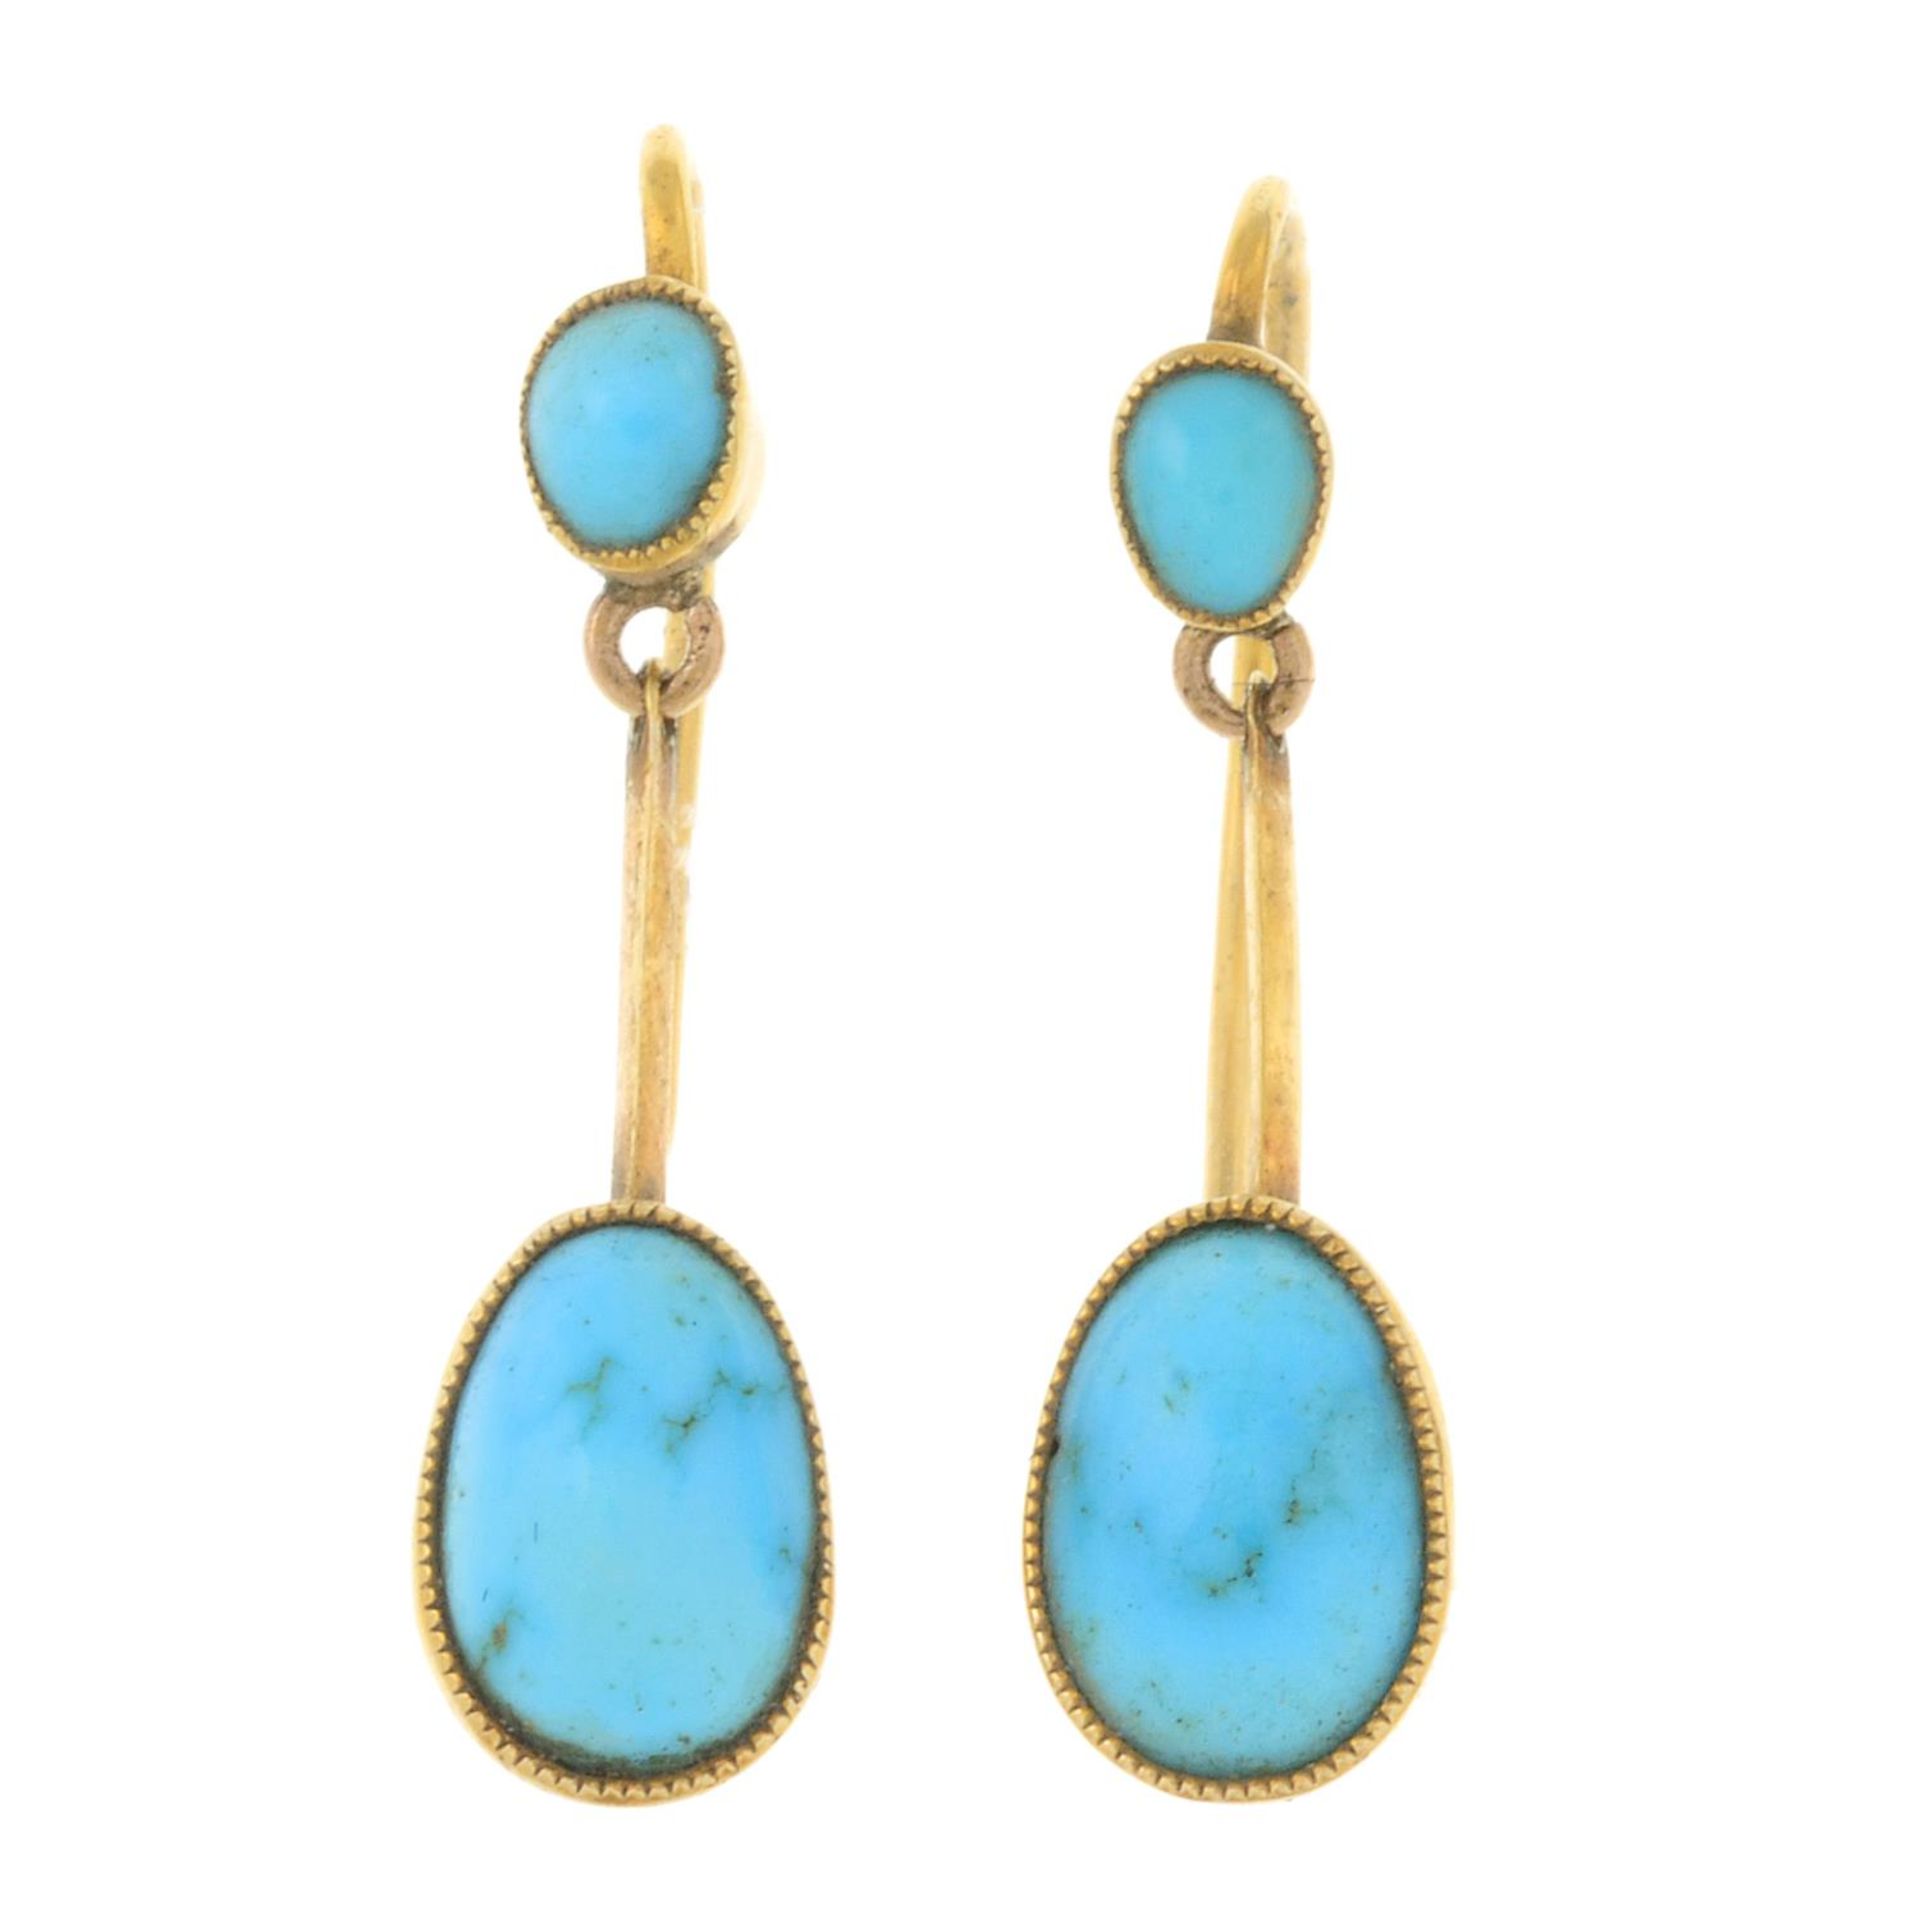 A pair of early 20th century 15ct gold turquoise drop earrings.Stamped 15CT, partially indistinct.